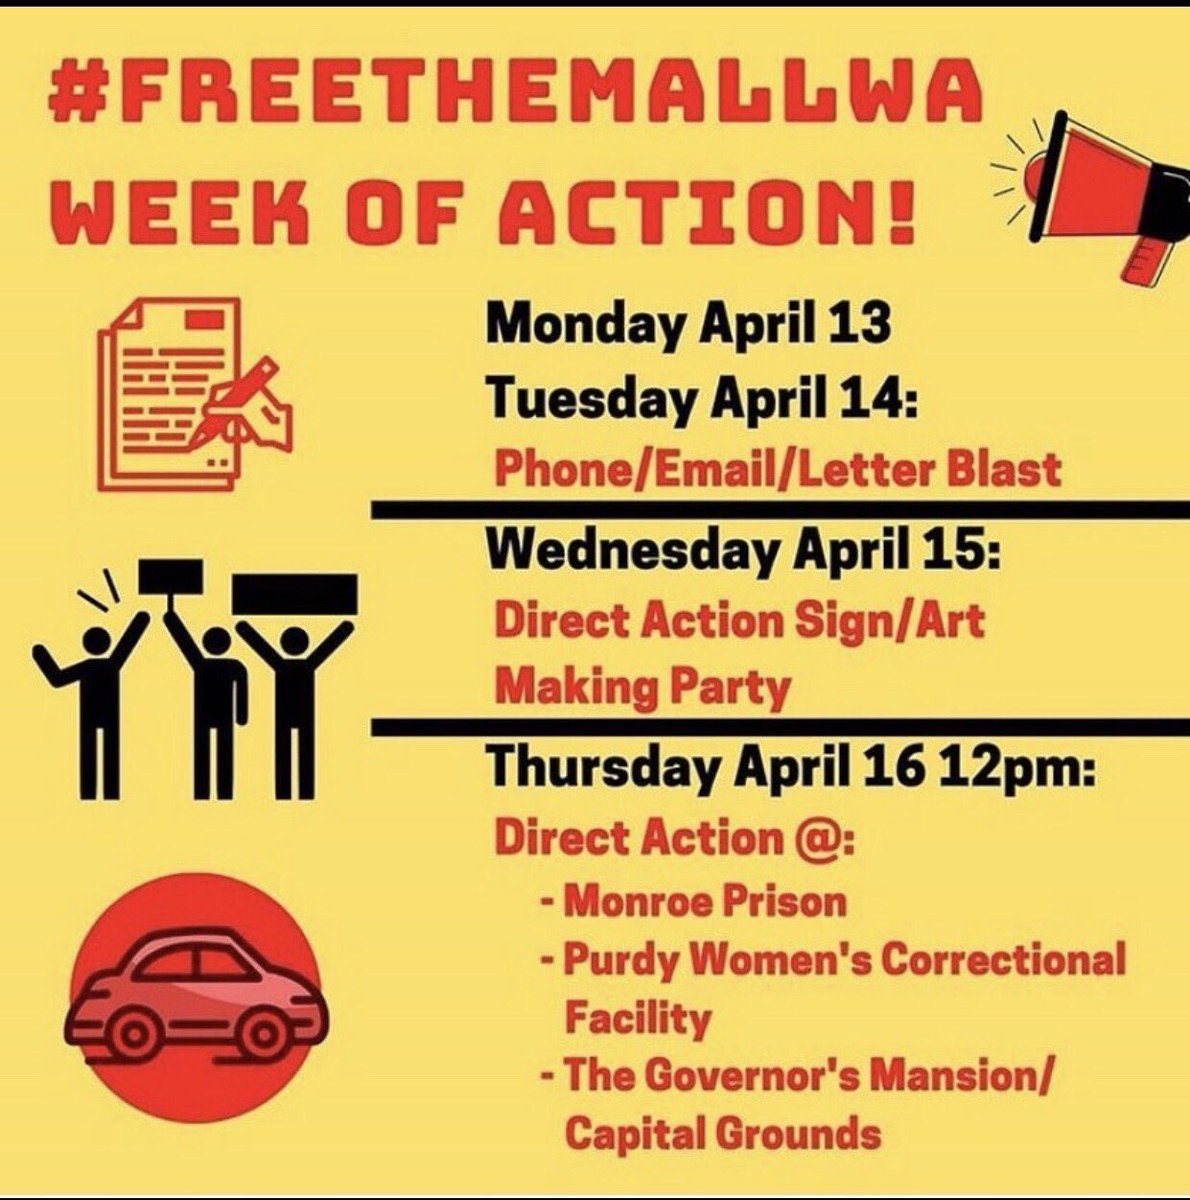 TO EVERYONE IN WA ST:PLEASE PARTICIPATE IN UPCOMING DIRECT ACTIONS. WE’LL BE PRACTICING SAFE SOCIAL DISTANCING & SOLIDARITY BY BLASTING MUSIC FROM CARS. MORE INFO COMING SOON. DM FOR MORE DETAILS  #FreeThemAllWA